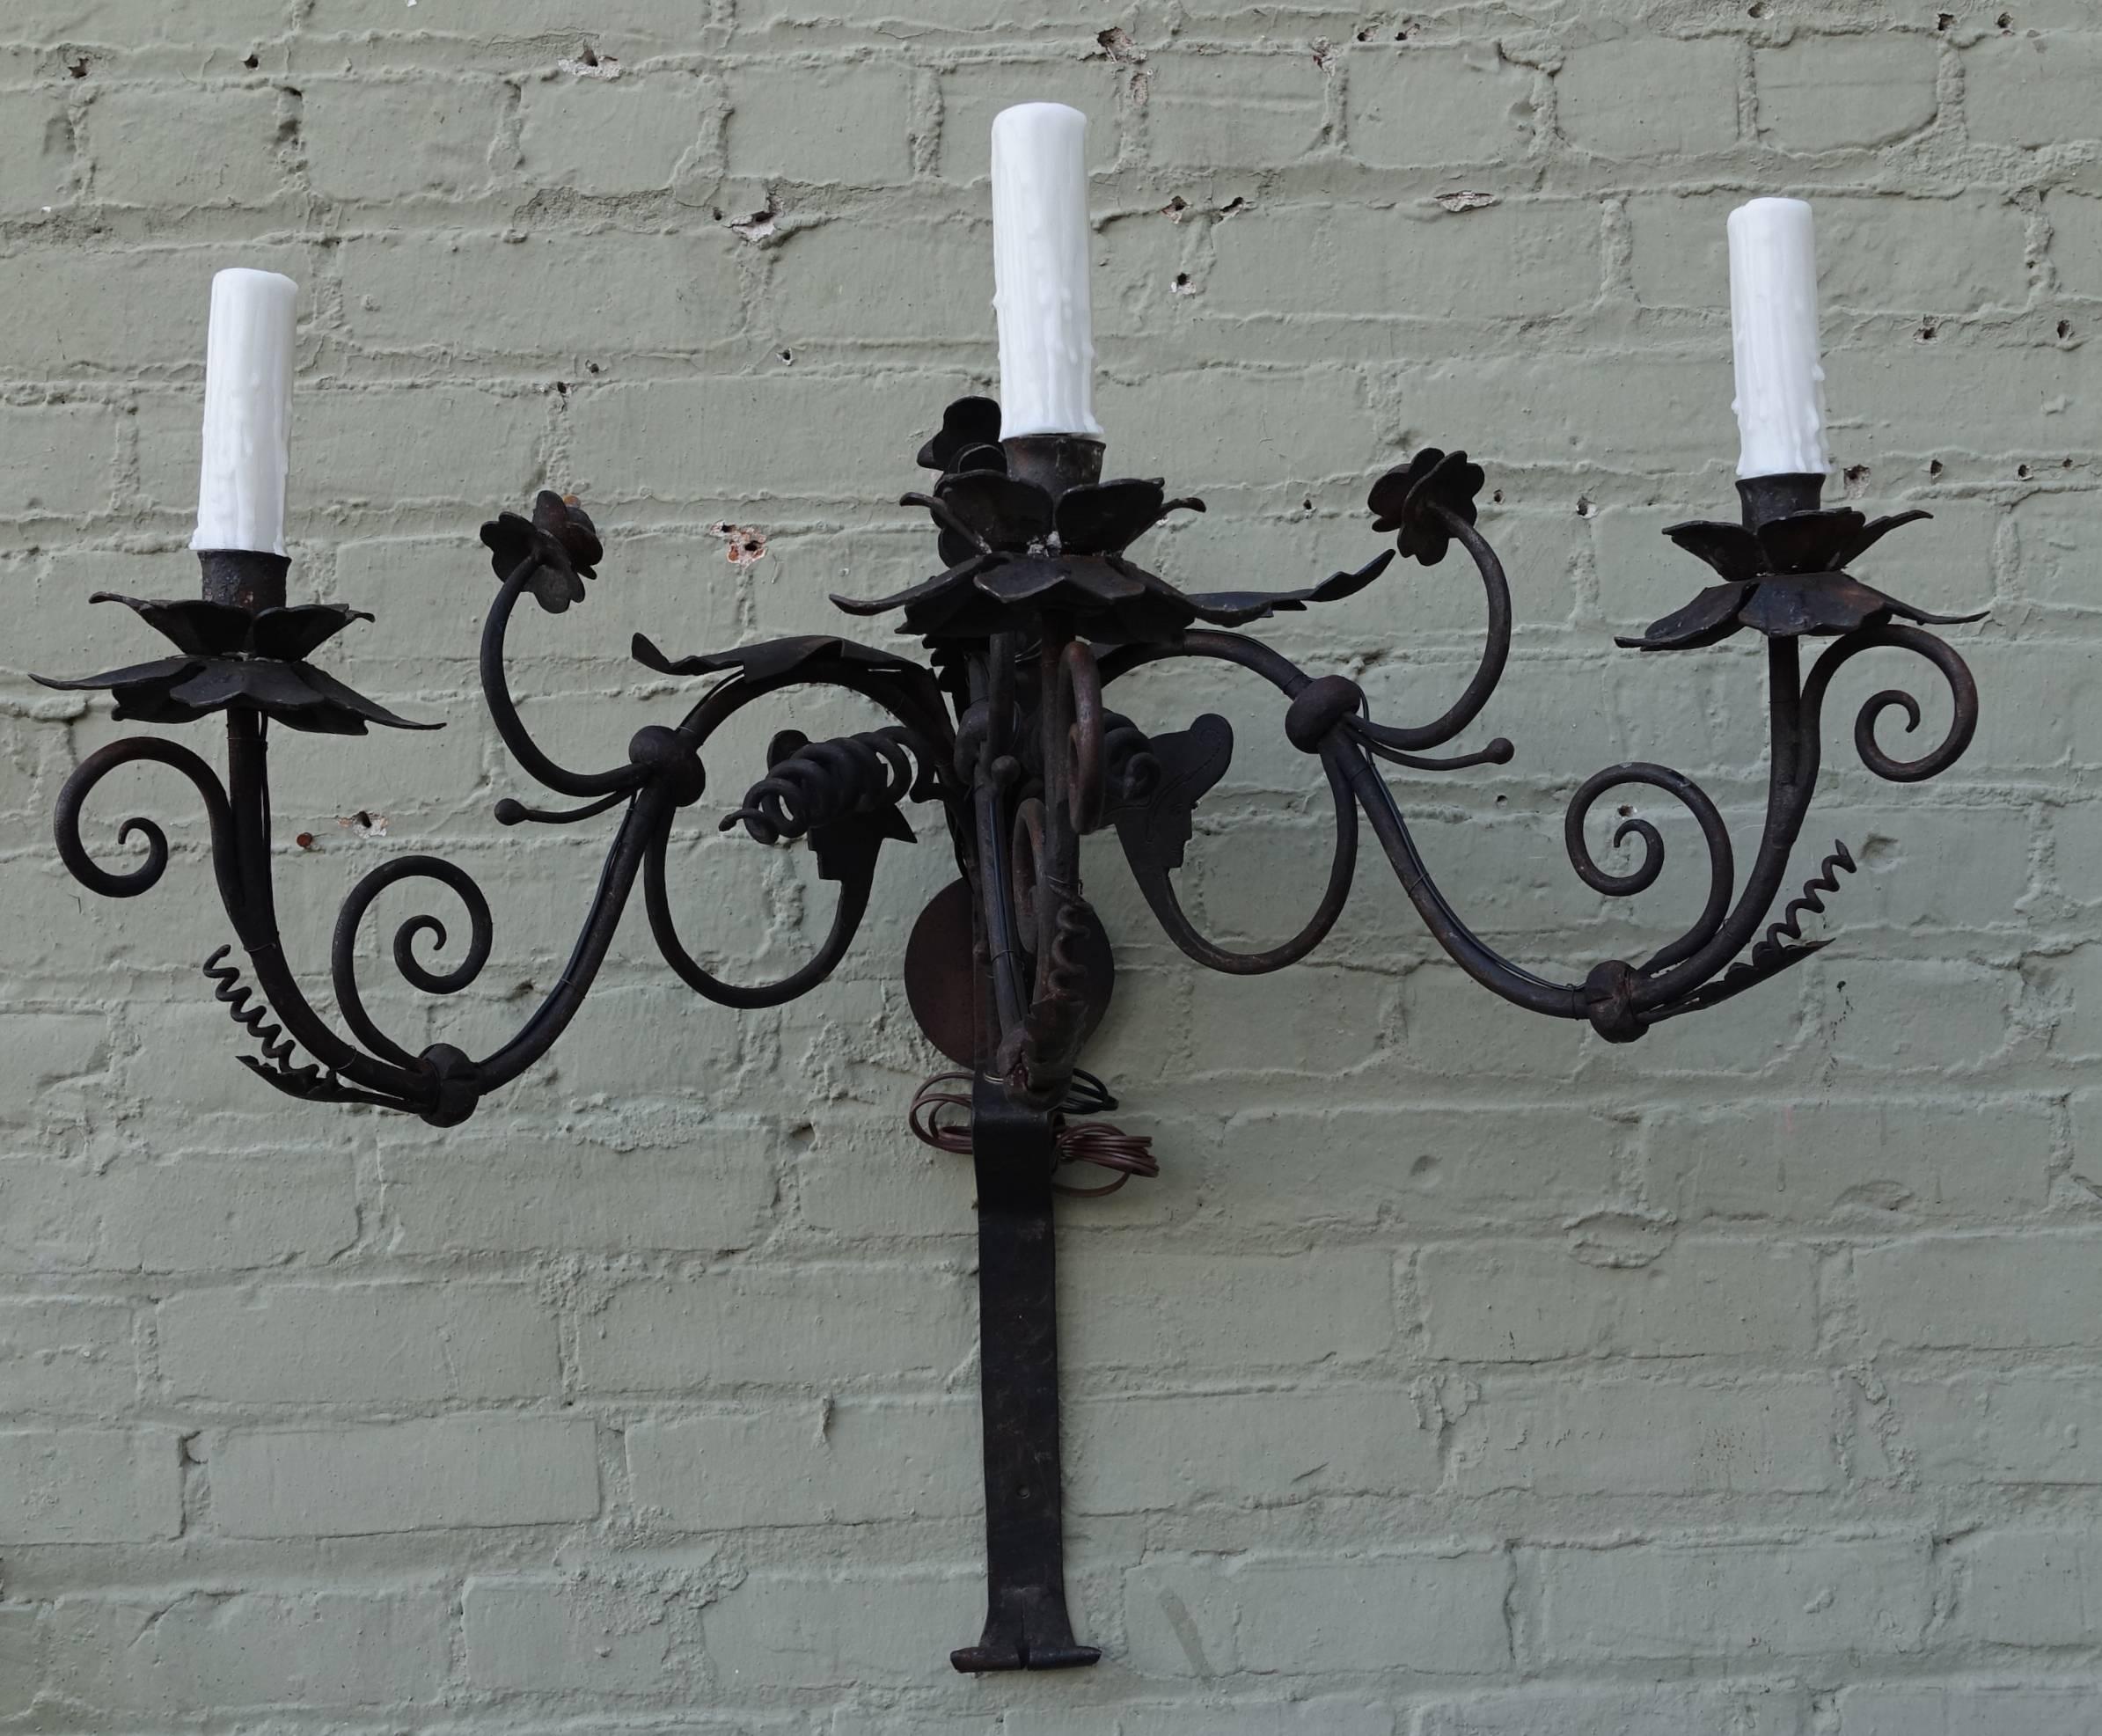 Monumental pair of three-light wrought iron sconces depicting flowers, swirls and faces with wrought iron back plates. The sconces are newly wired with drip-wax candle covers and are ready to install.